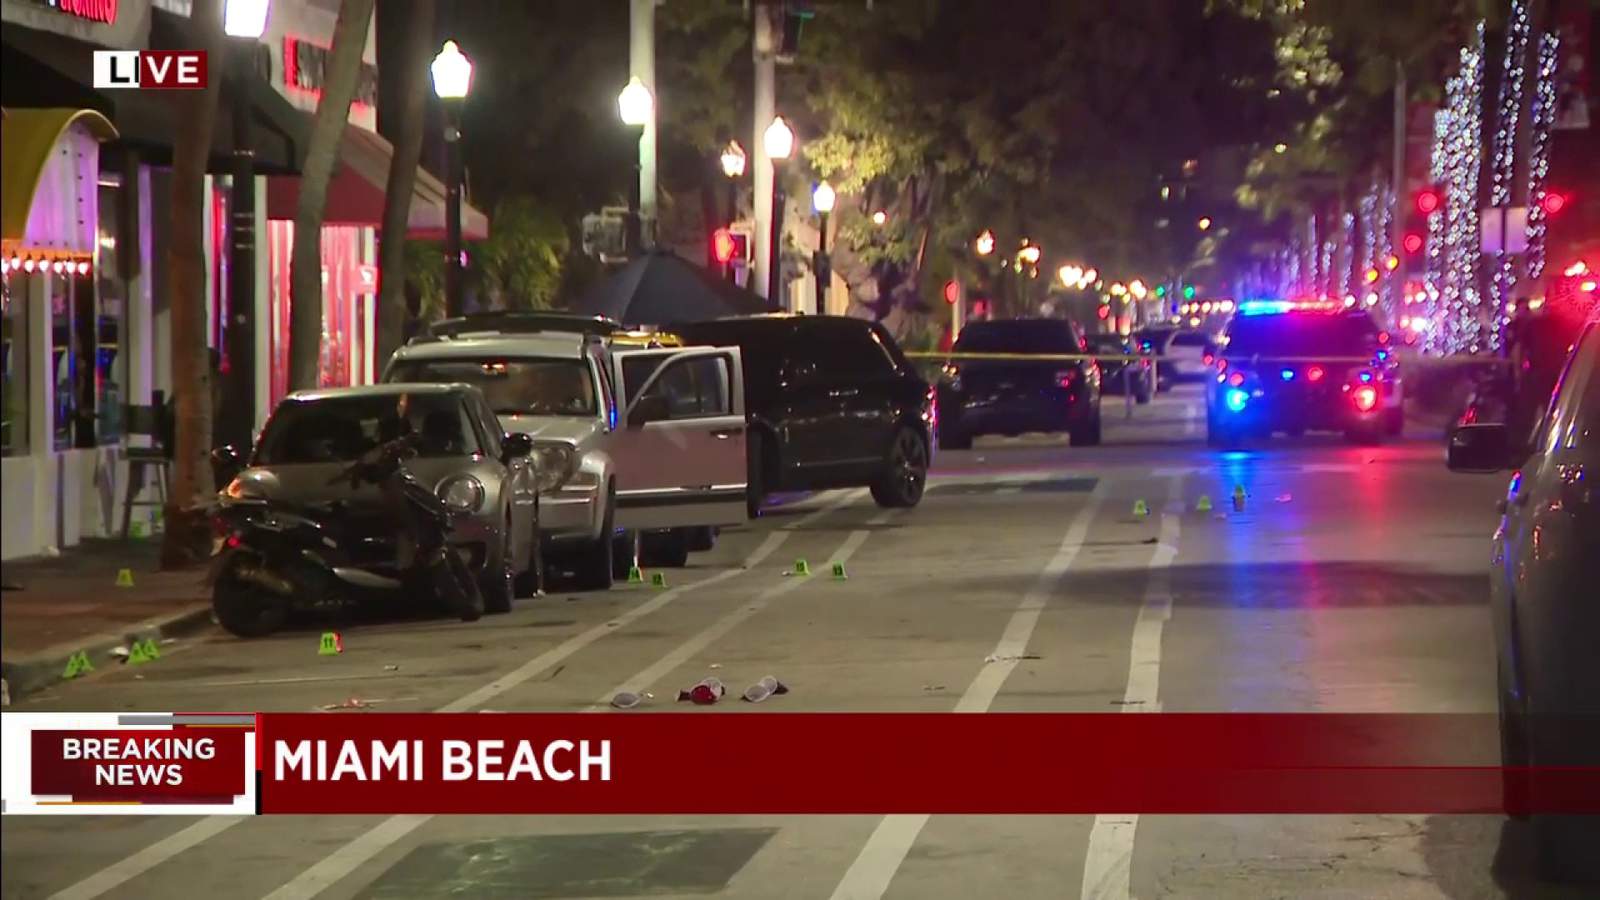 Police: Dark SUV flees scene after triple shooting in Miami Beach - WPLG Local 10